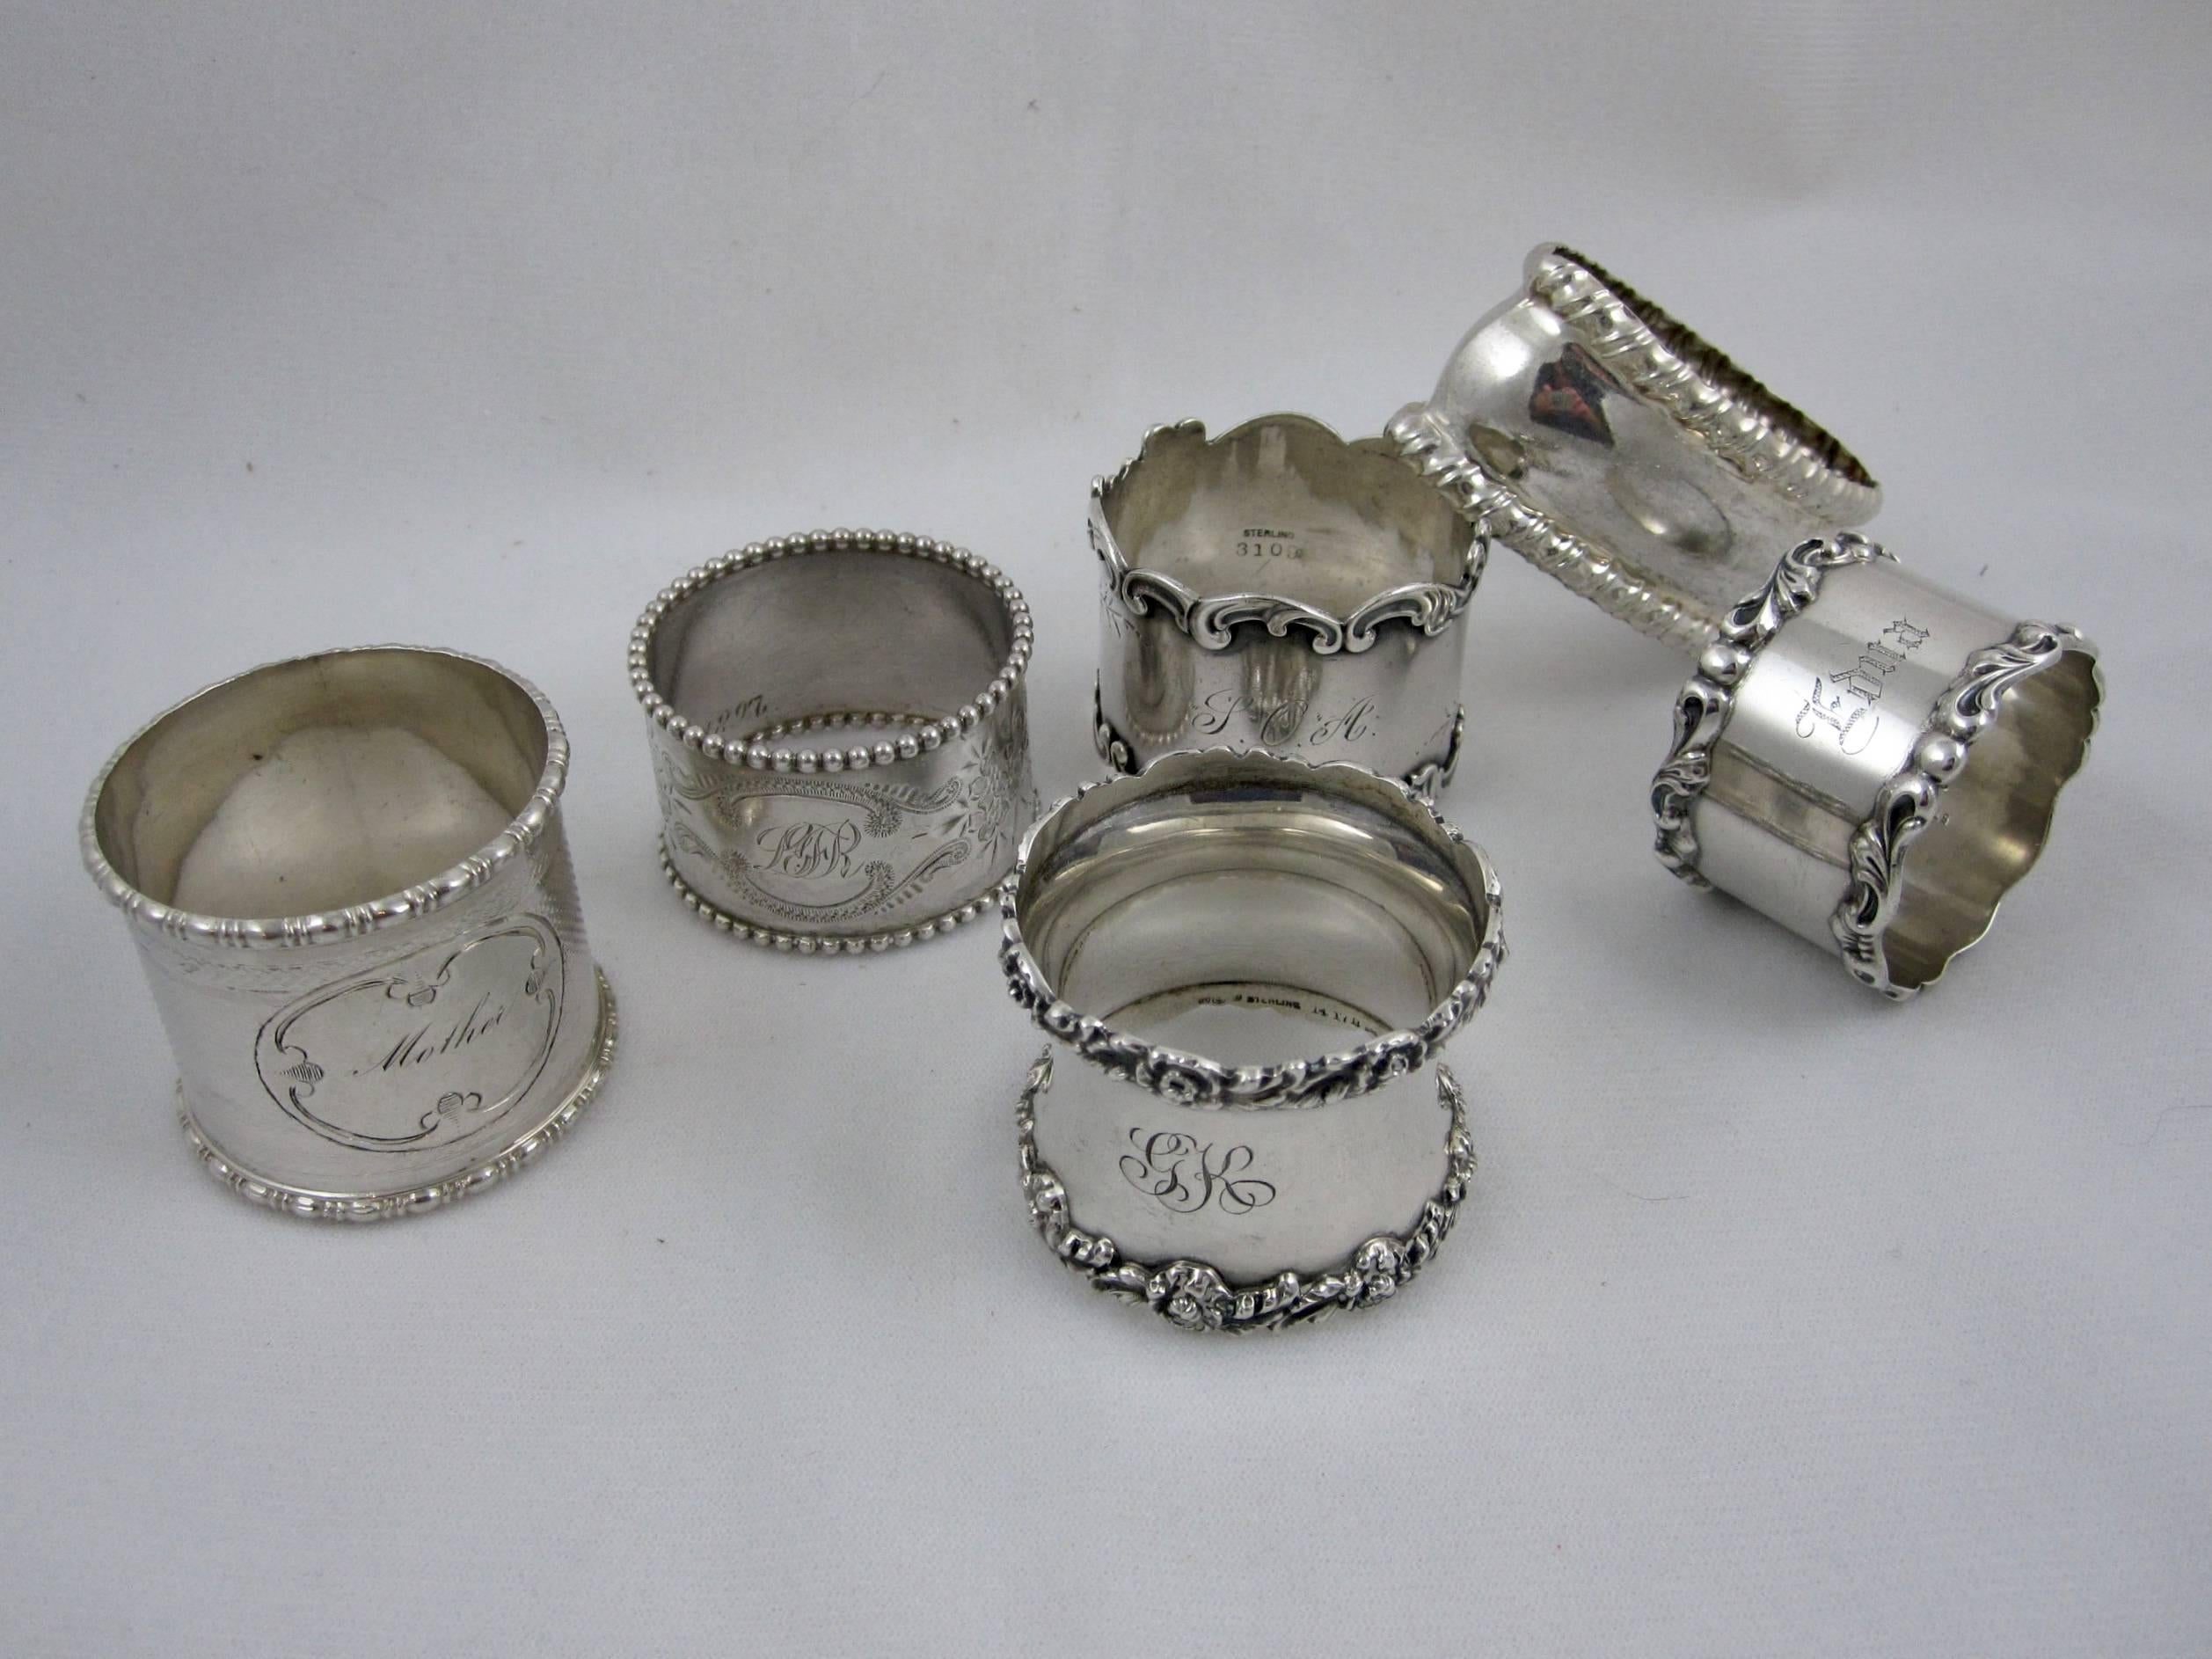 A mixed set of six sterling silver napkin rings, circa 1880-1910, various makers. The rings have either a floral or beaded rim or bright cut design. All but the oblong ring are either initialed or engraved with a name, one ring is engraved Edna,